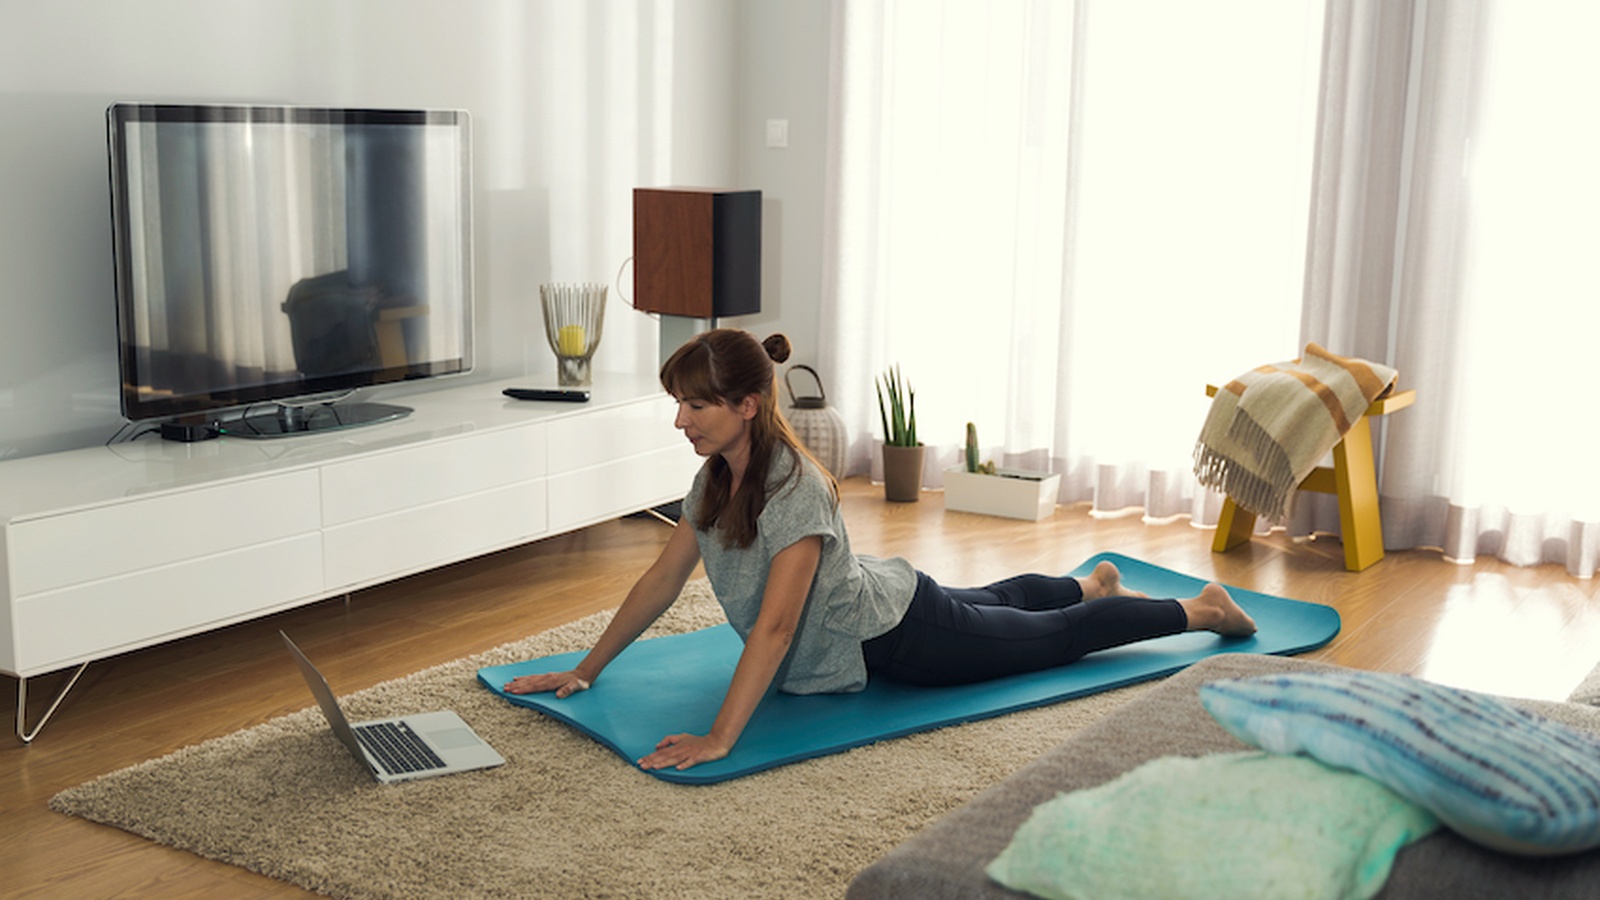 10 Free Yoga & Meditation Classes You Can Do at Home